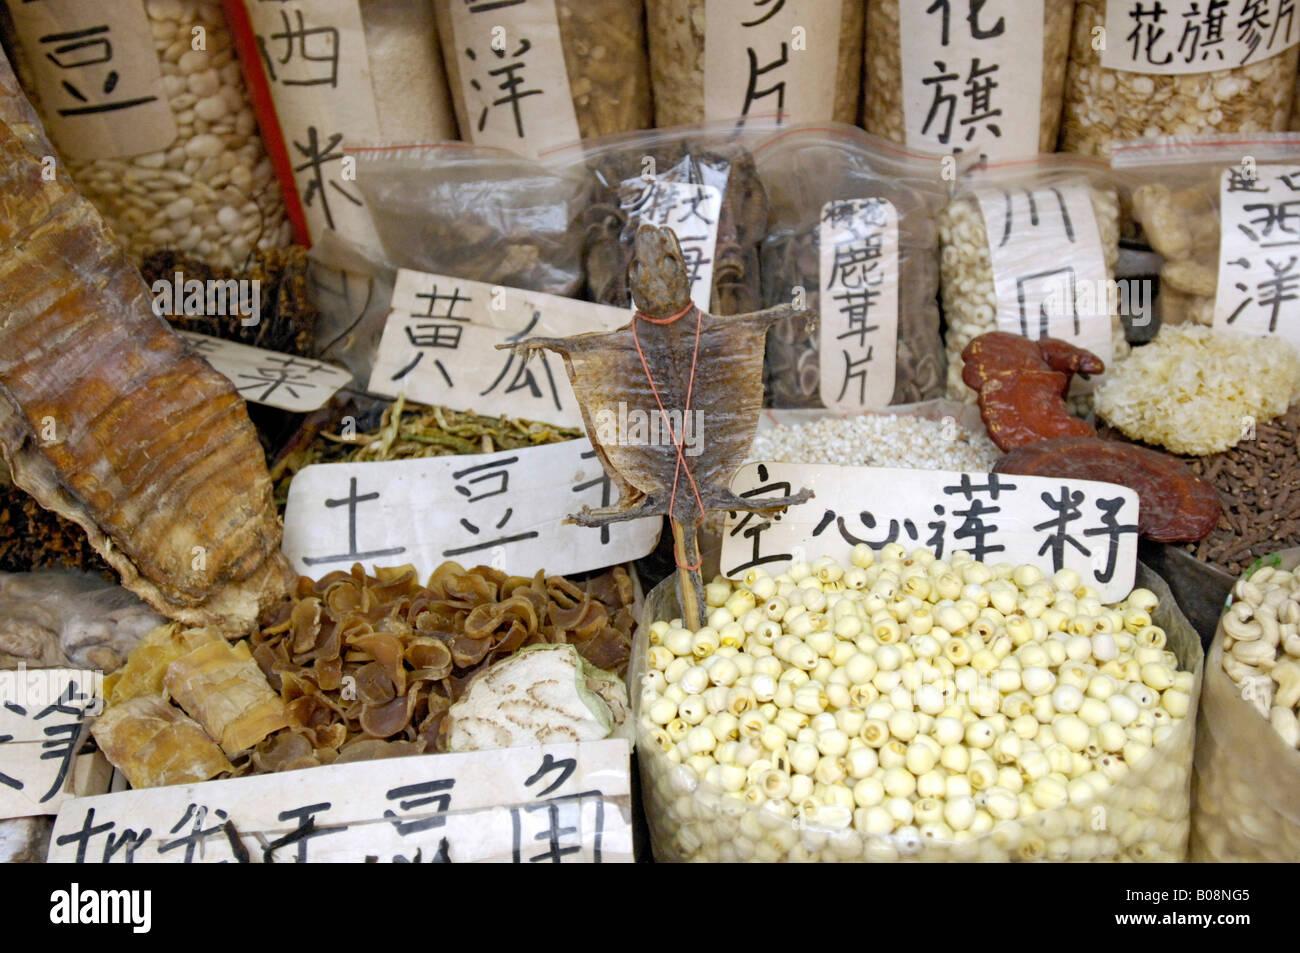 Sacks of dried fish, nuts and beans at a market in Xián, Shaanxi, China, East Asia Stock Photo